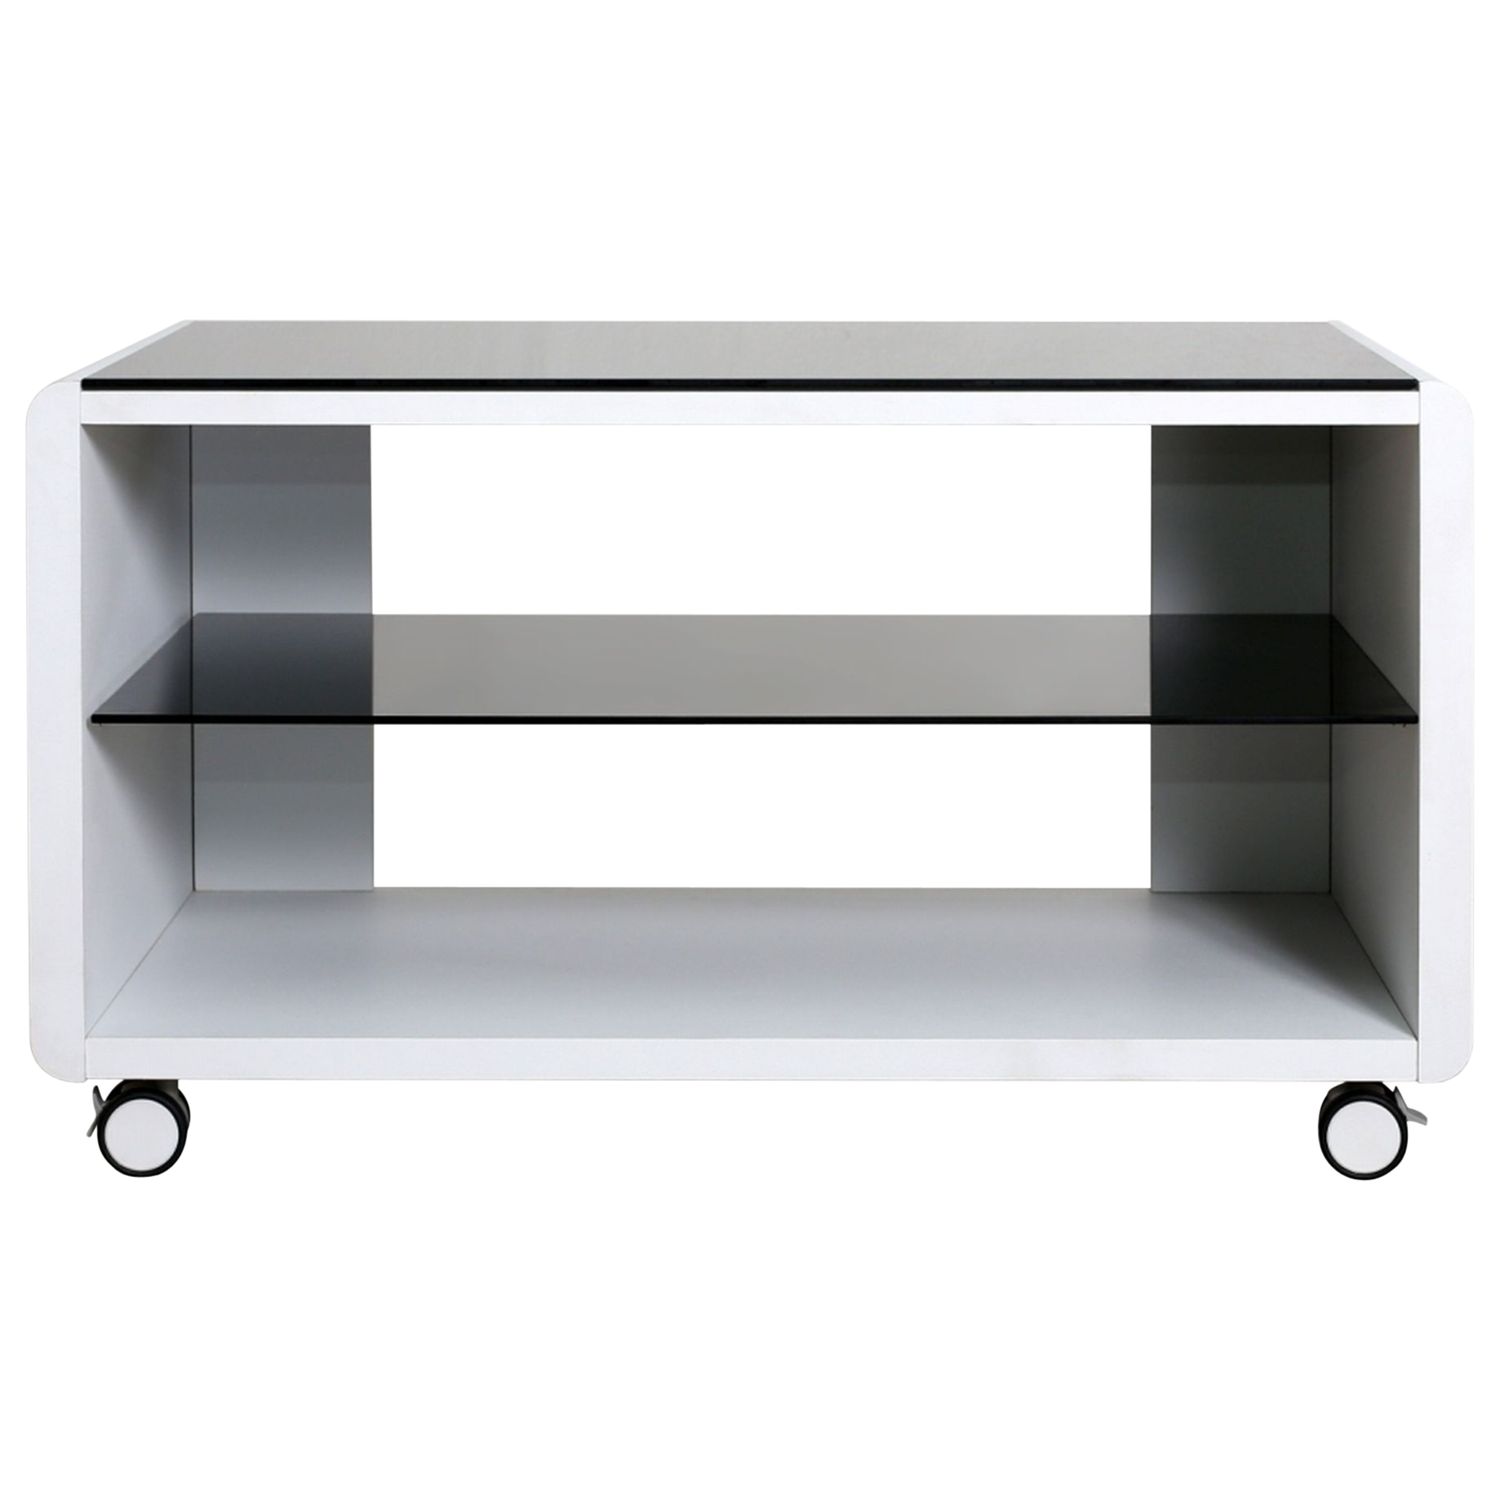 Optimum Concept 800 TV Stand for up to 32-inch TVs, White, width 80cm